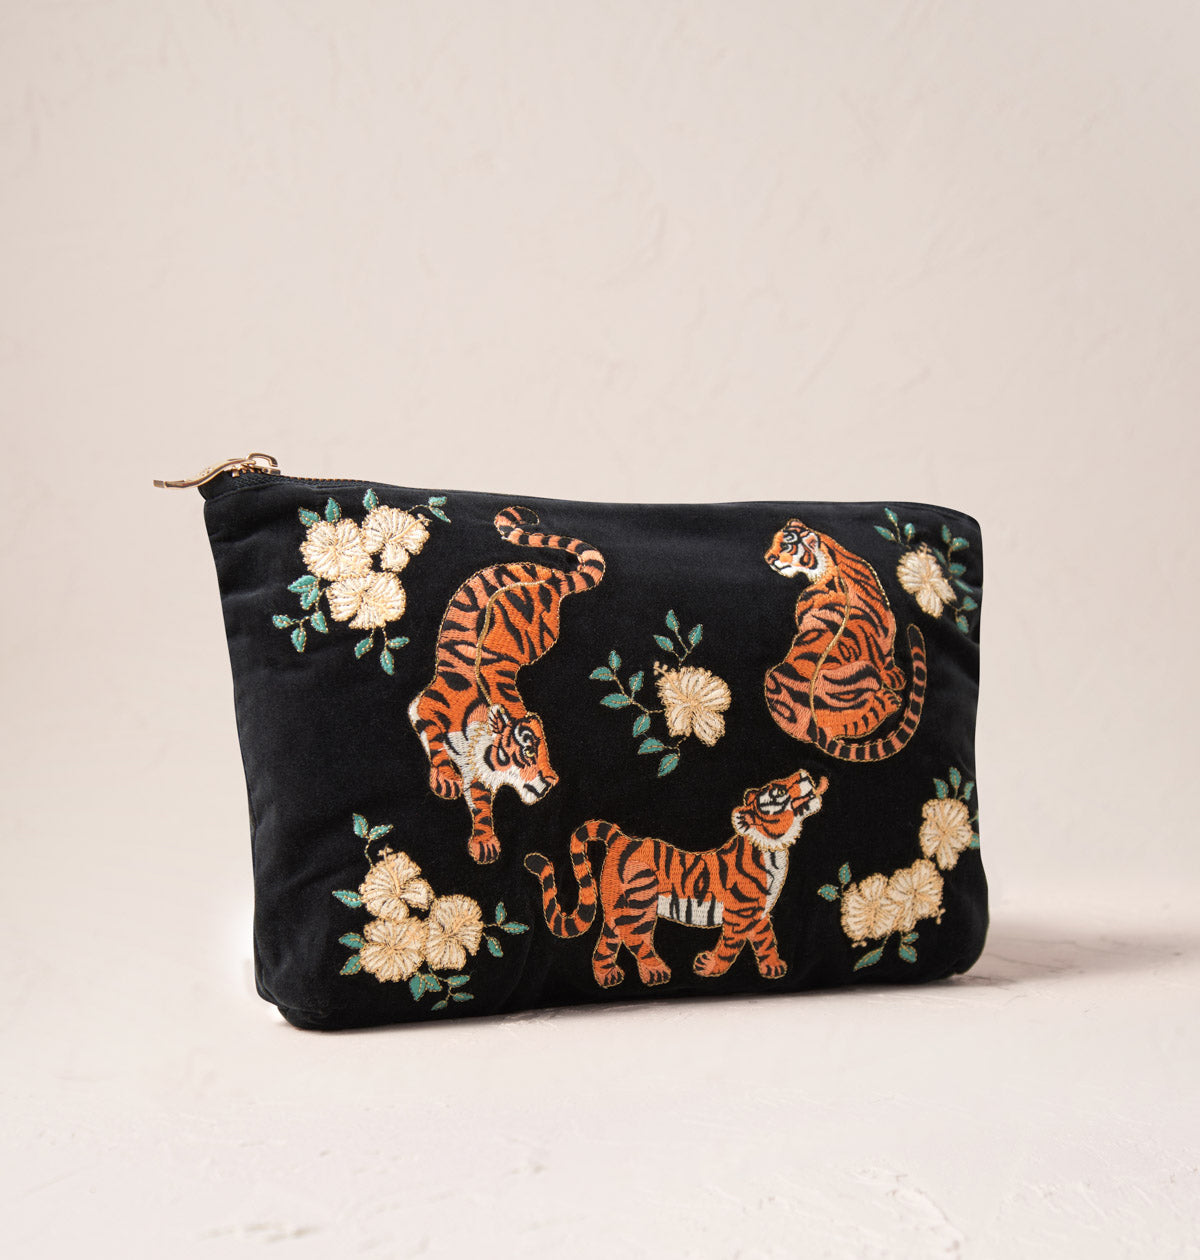 Tiger Print Apricot Everyday Pouch and Clutch Bag